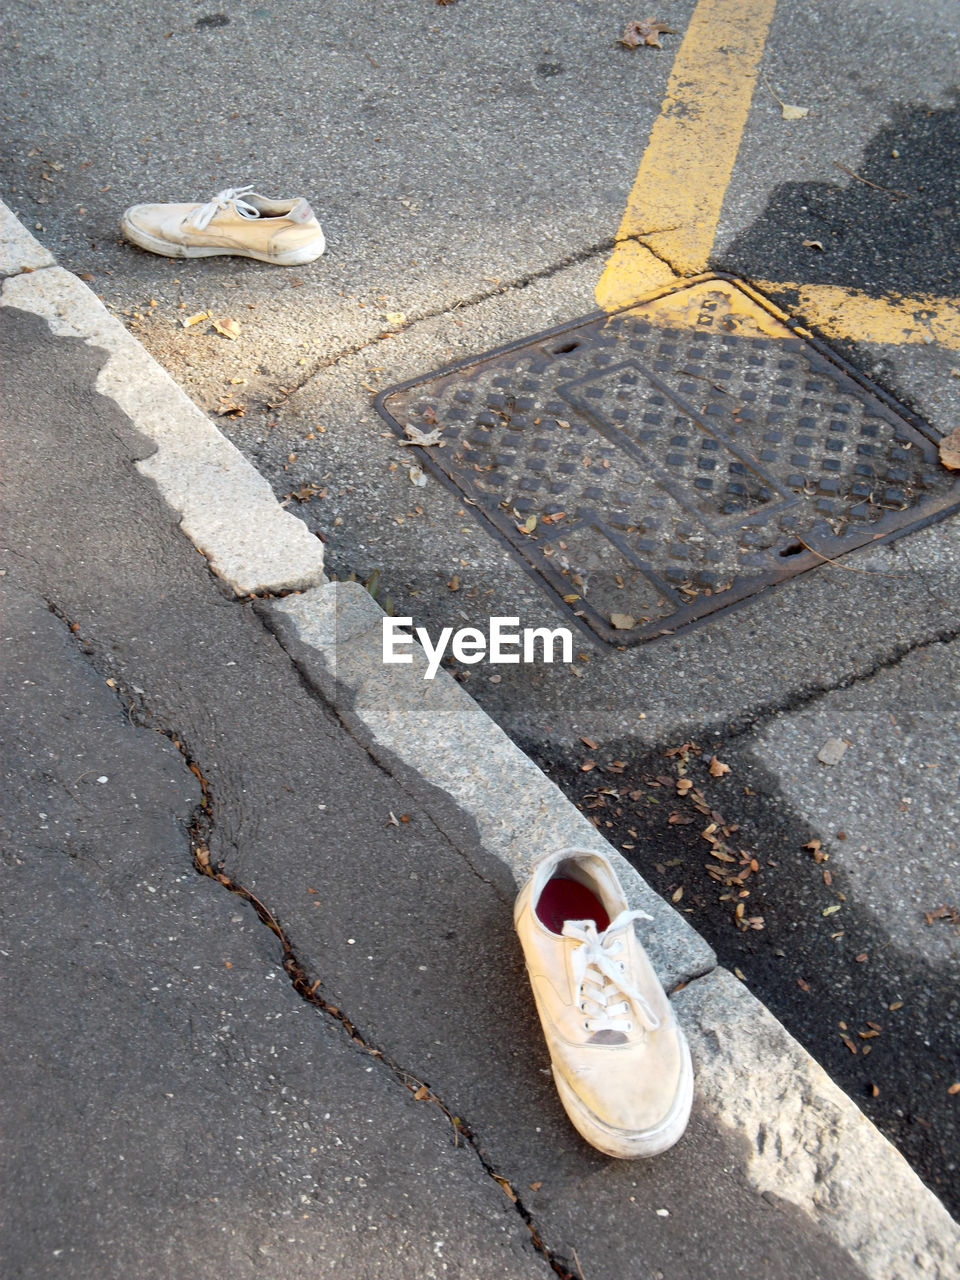 HIGH ANGLE VIEW OF SHOE ON STREET